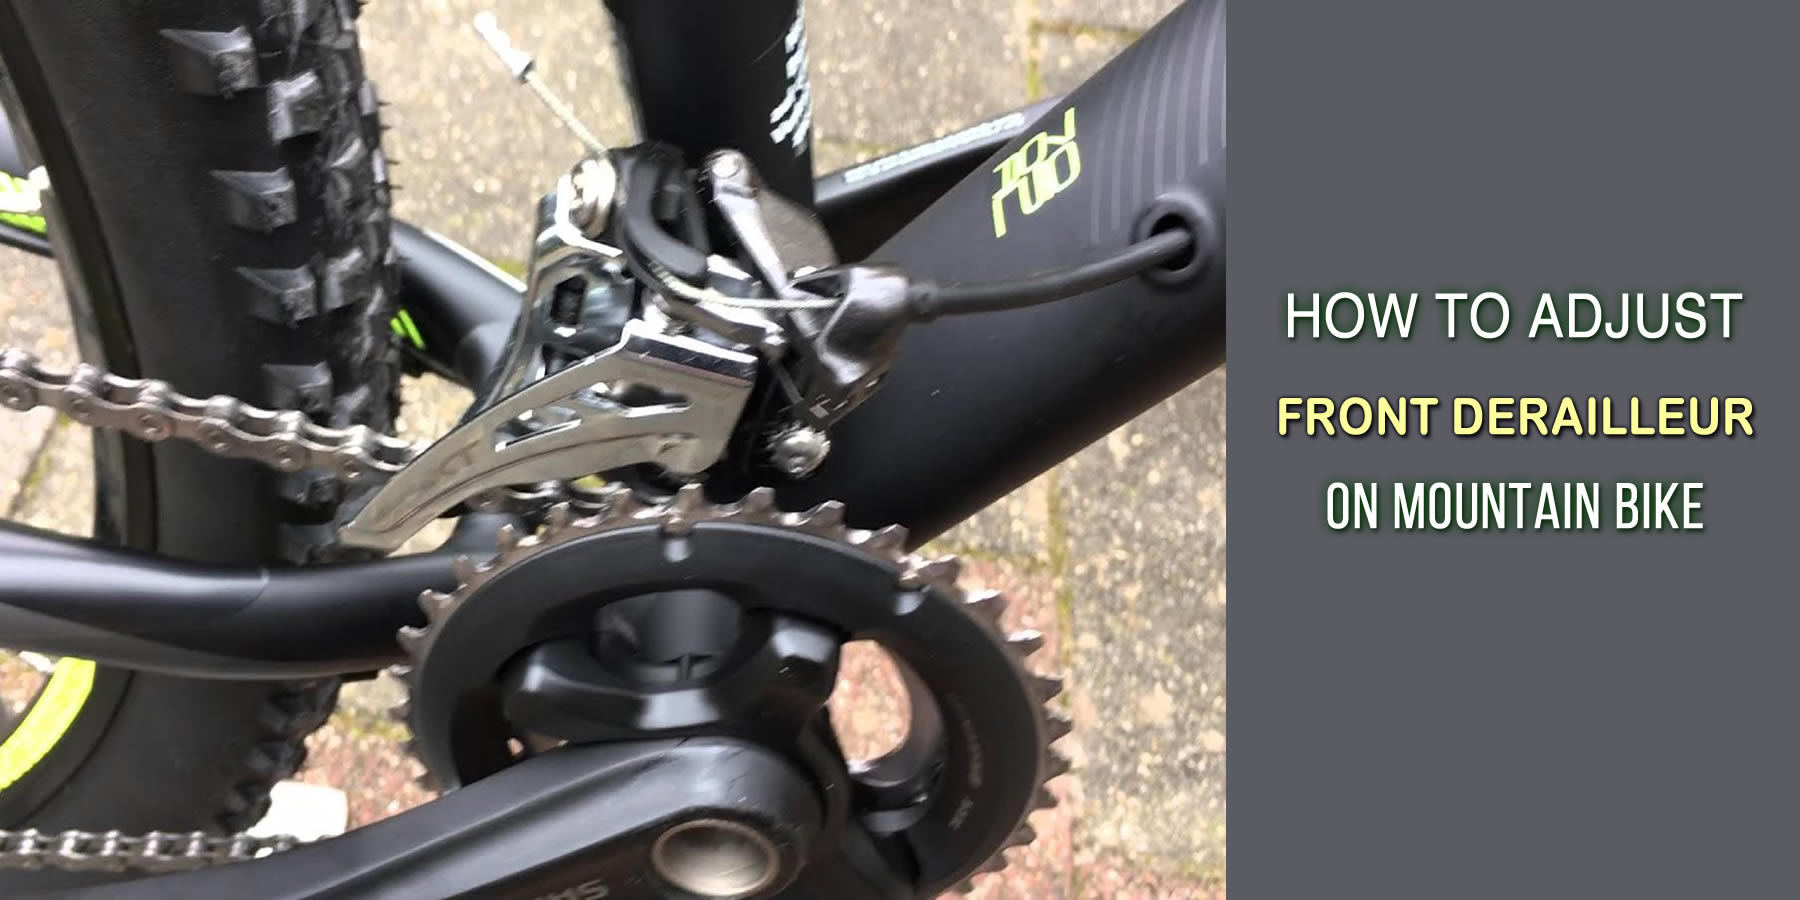 How To Adjust Front Derailleur On Mountain Bike: Follow These 6 Steps